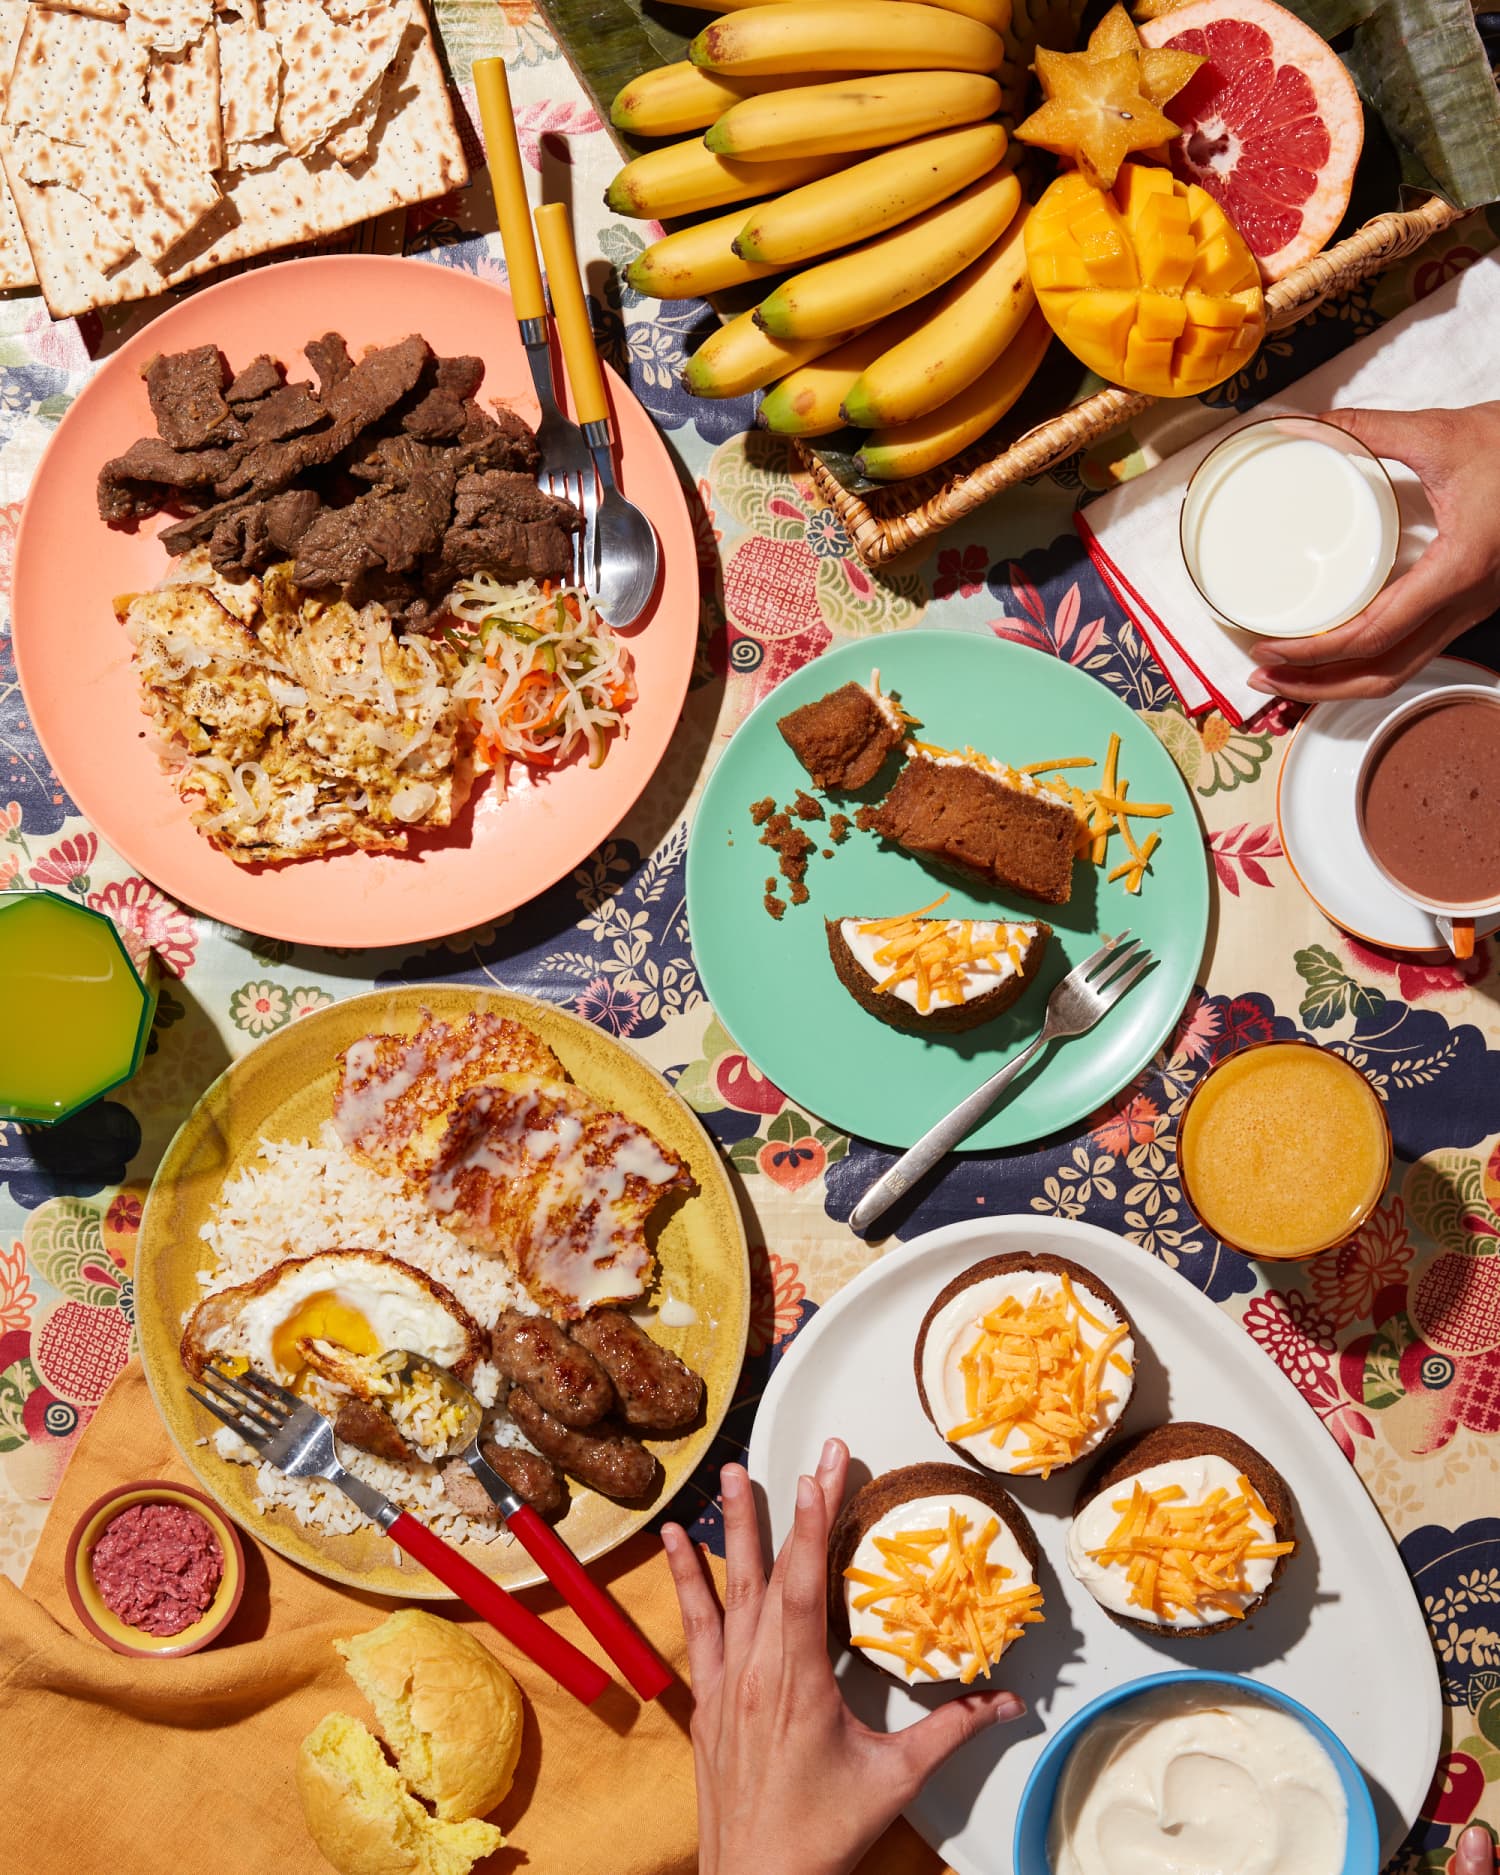 The Versatility of Silog: How Making Breakfast Is a Hallmark of the Filipino American Experience